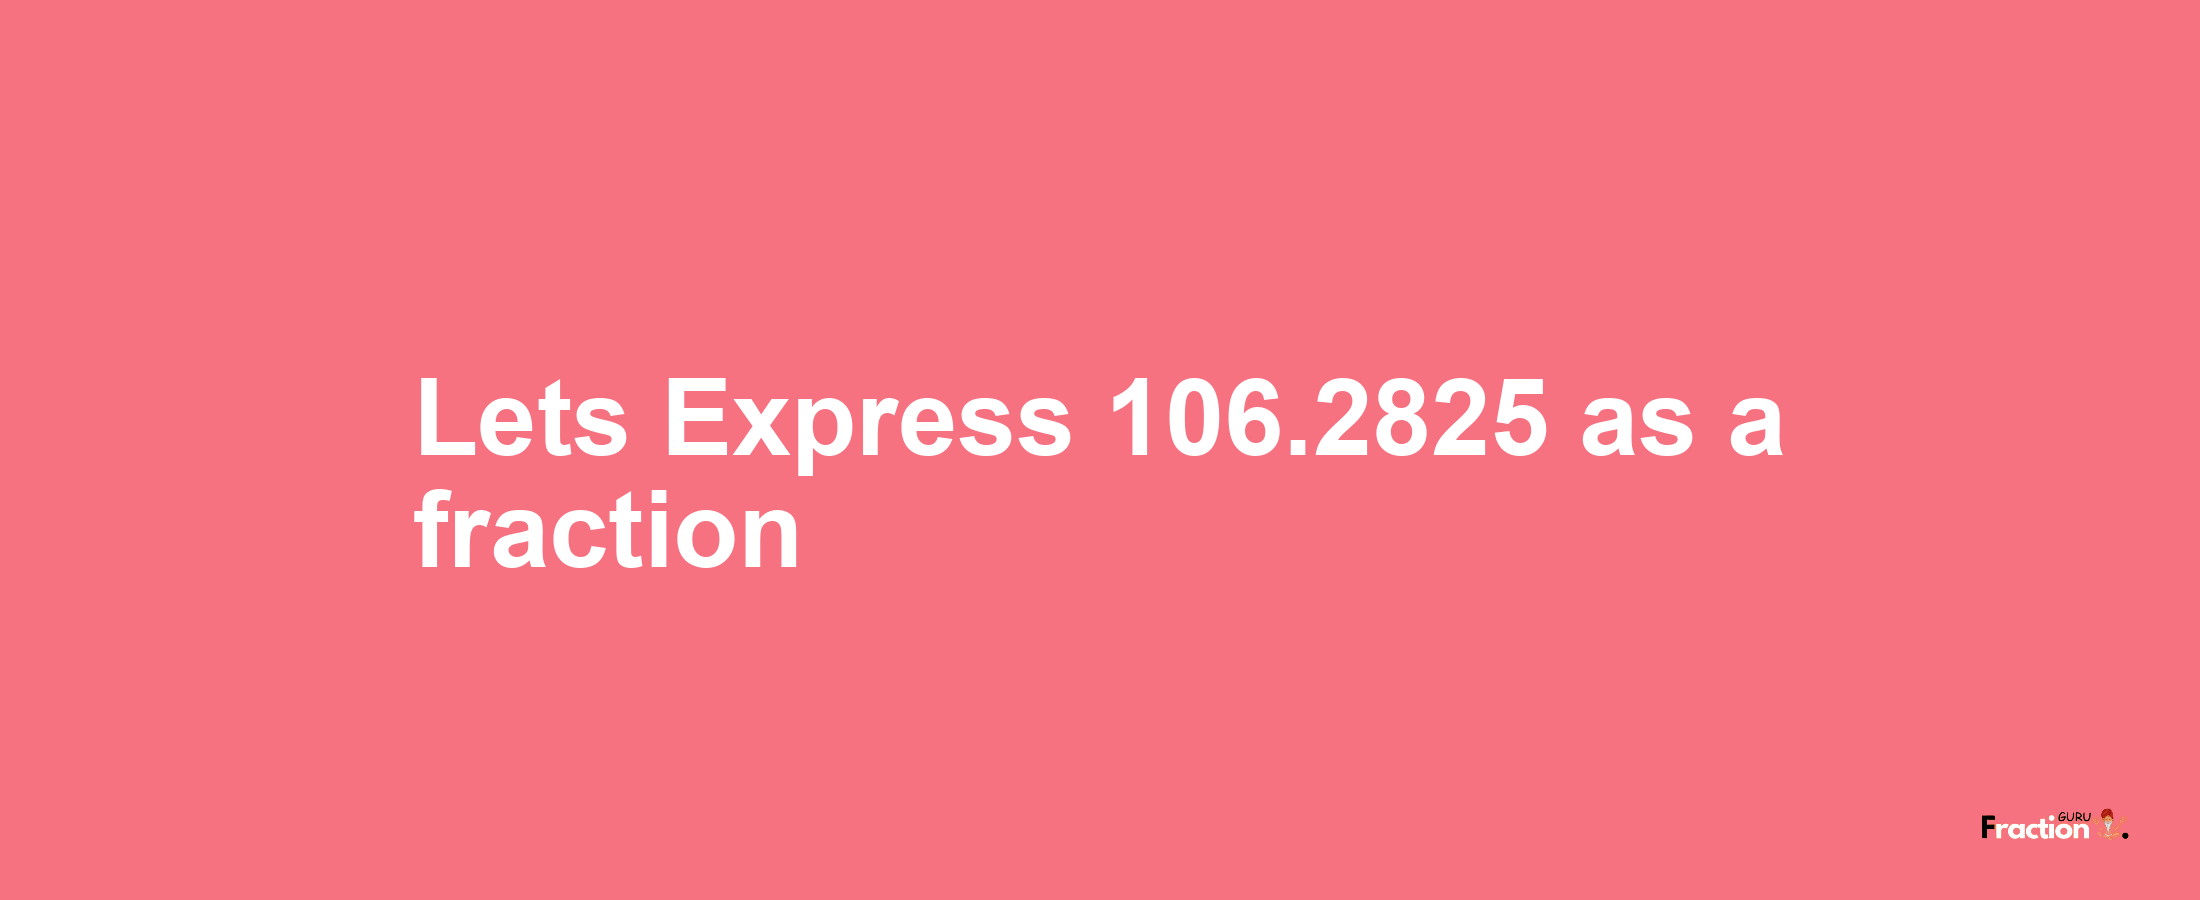 Lets Express 106.2825 as afraction